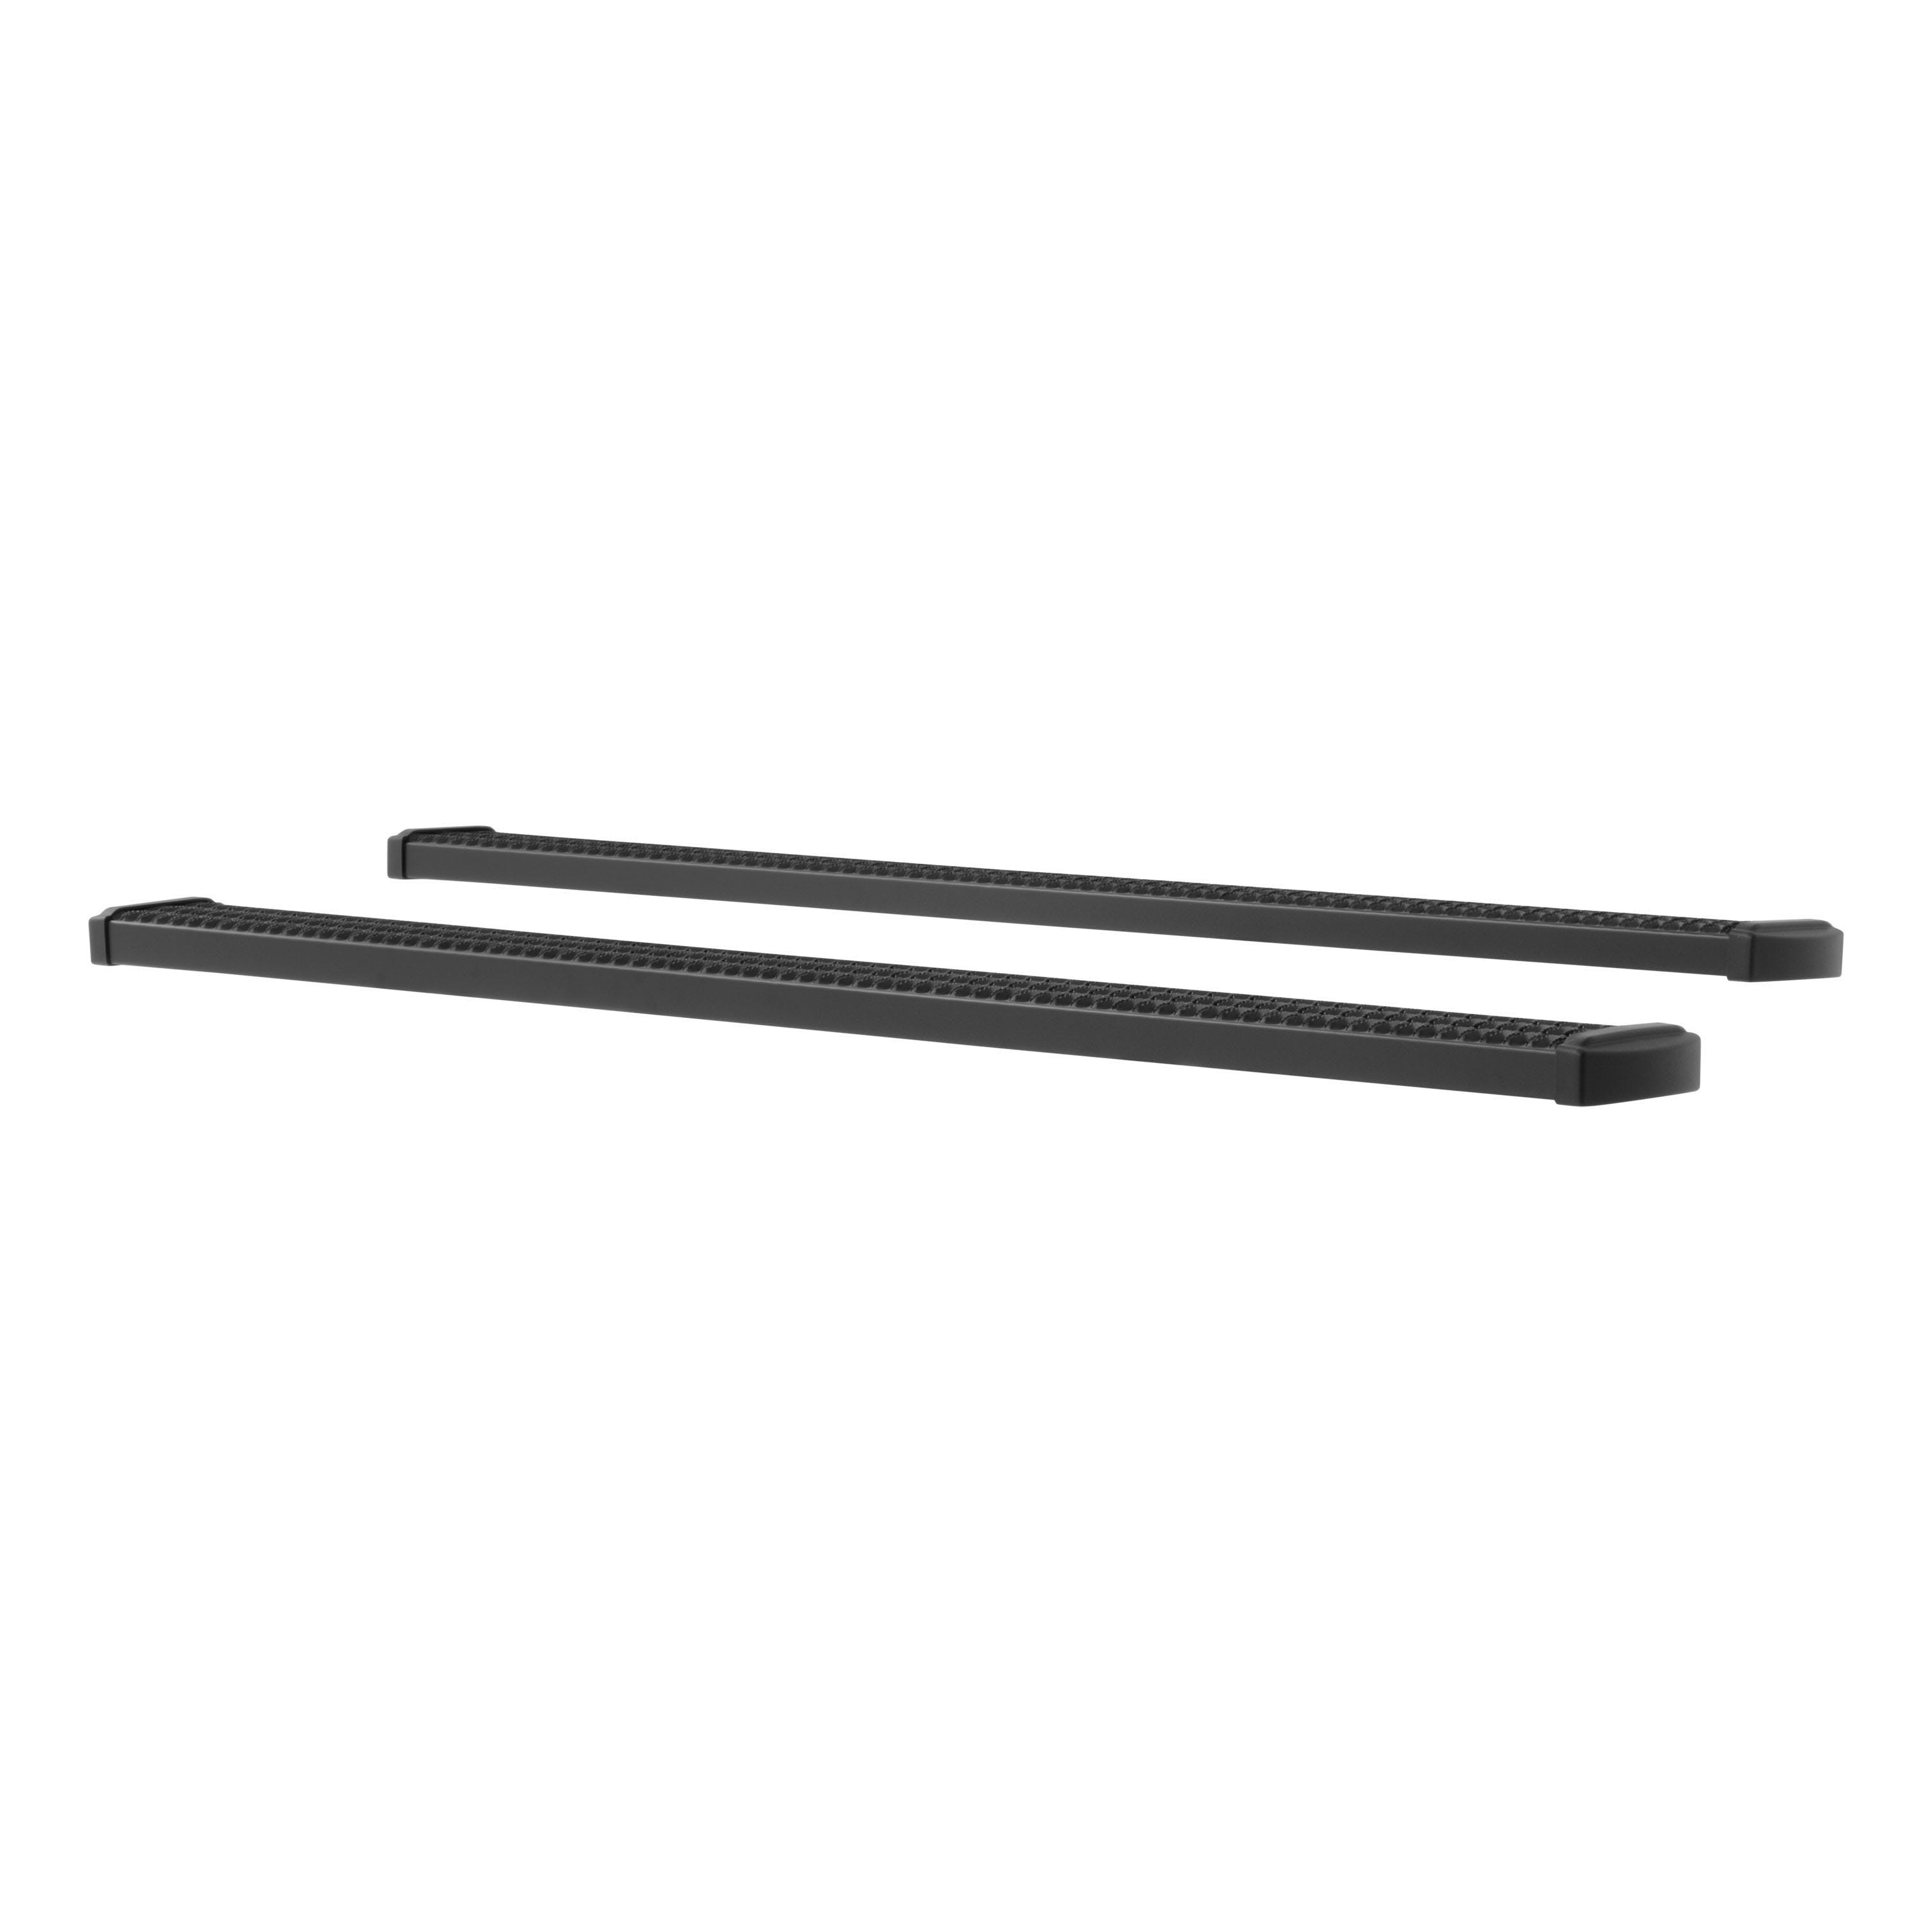 LUVERNE 415088-401743 Grip Step 7 inch Running Boards